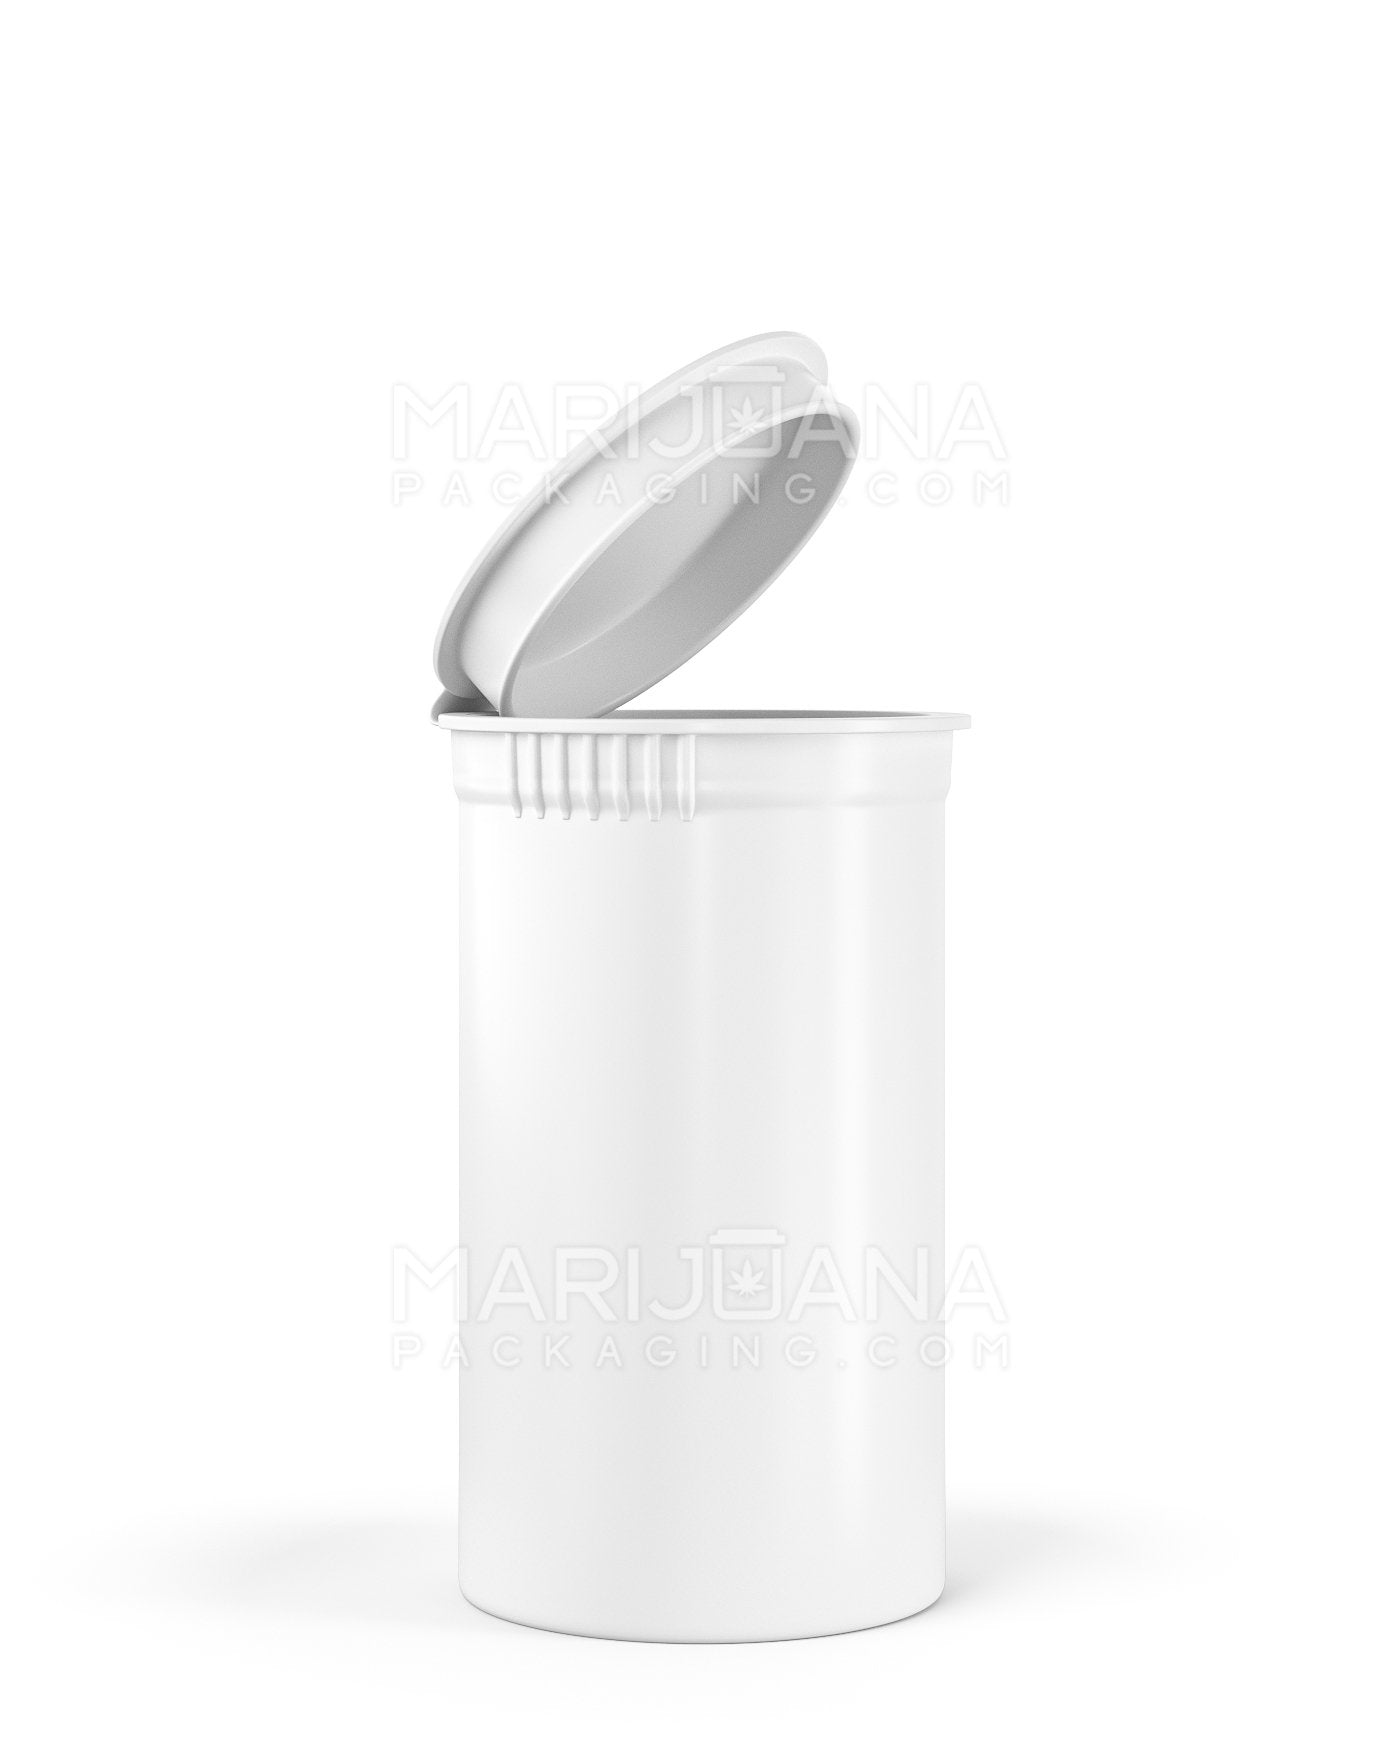 Child Resistant & Sustainable 100% Biodegradable Opaque White Pop Top Bottles | 19dr - 3.5g | Sample - 1